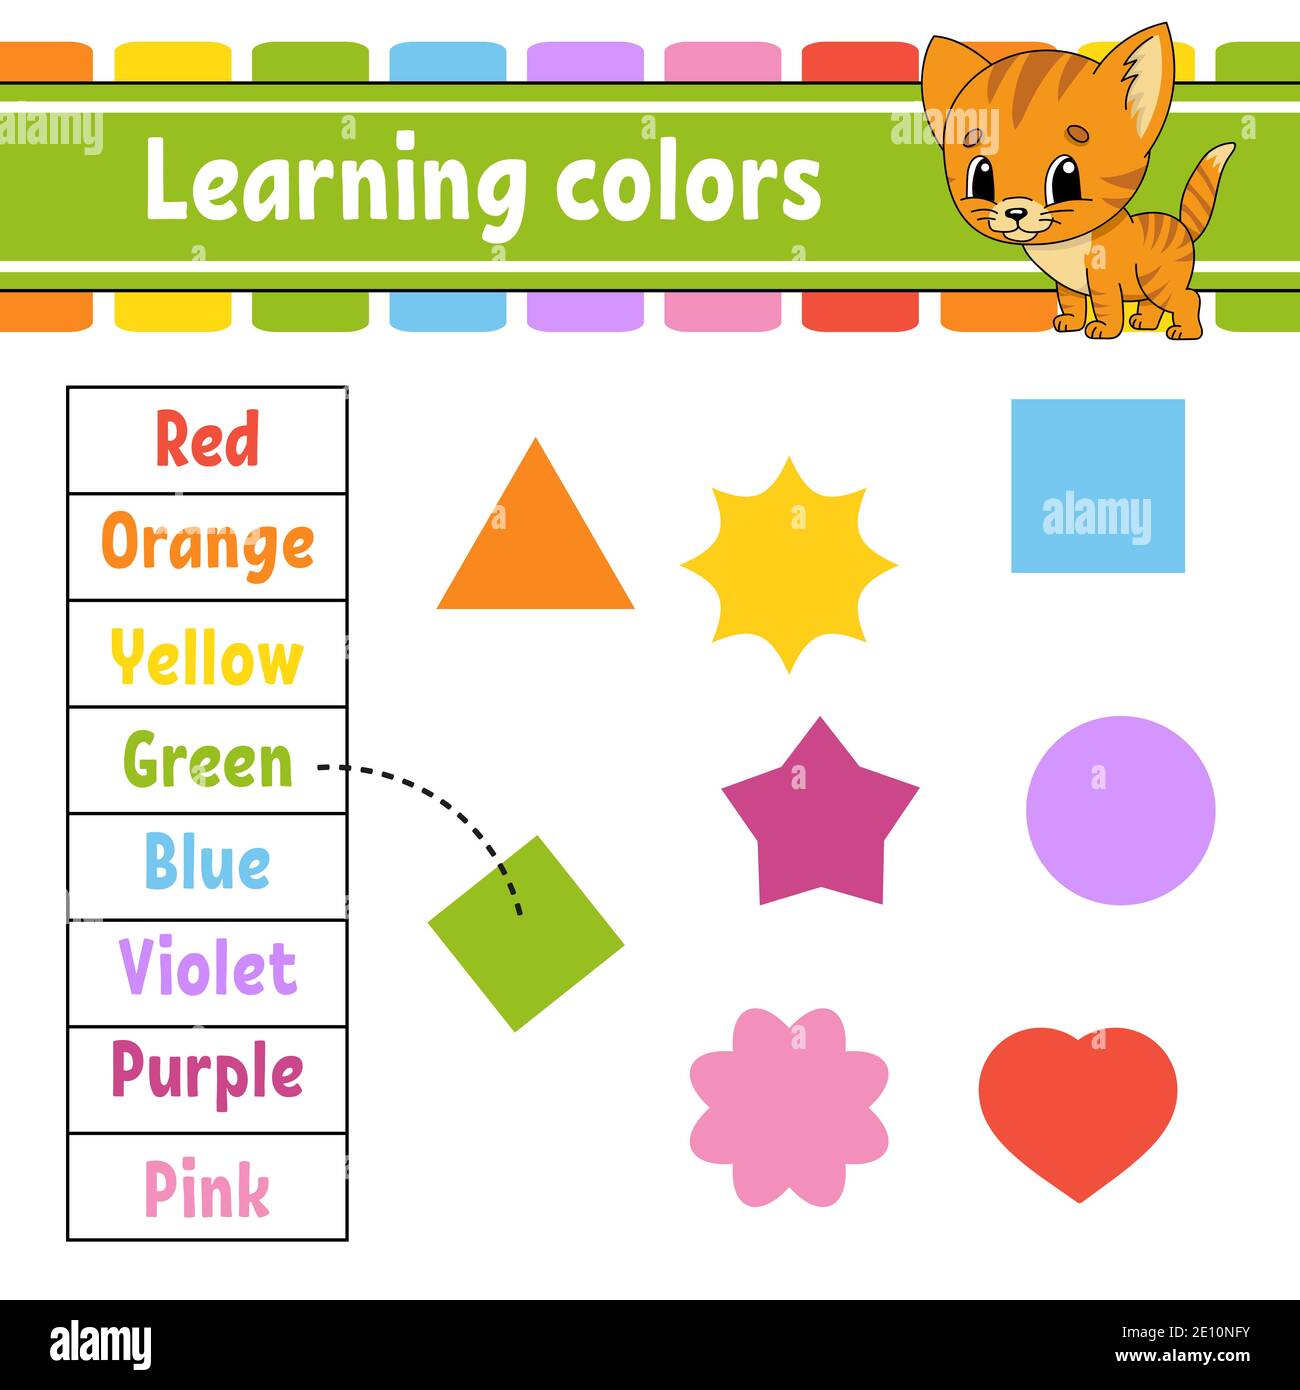 https://c8.alamy.com/comp/2E10NFY/learning-colors-education-developing-worksheet-activity-page-with-pictures-game-for-children-isolated-vector-illustration-funny-character-cartoo-2E10NFY.jpg